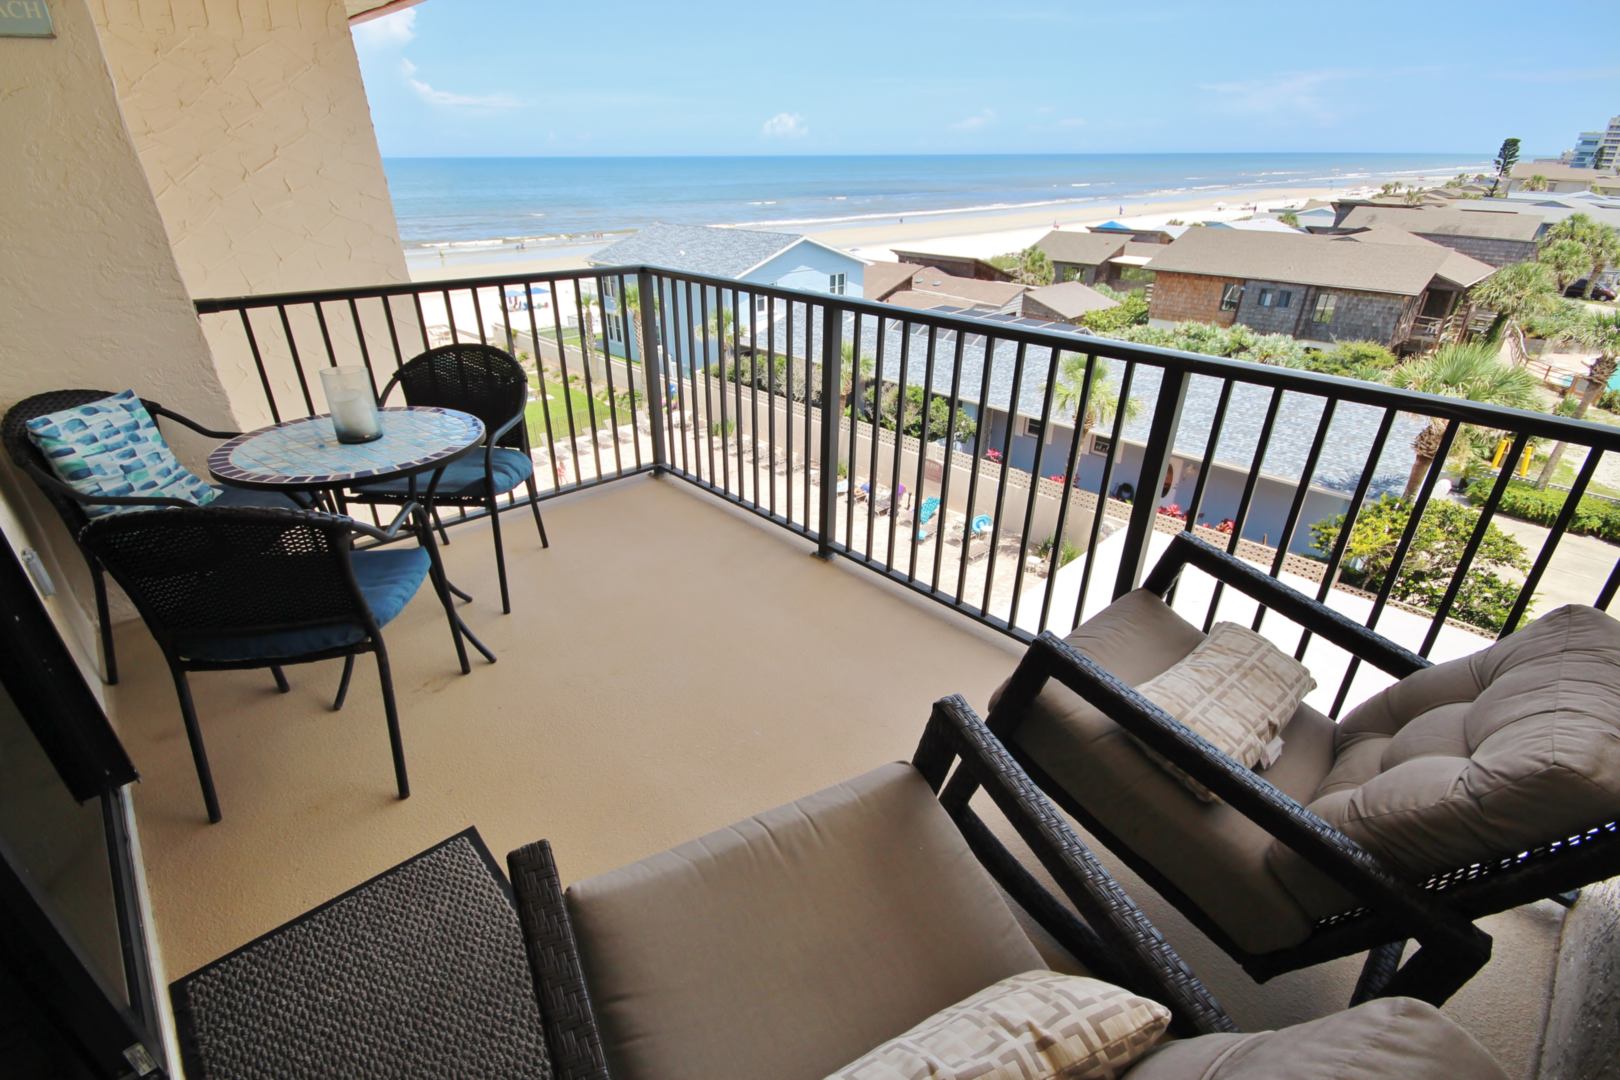 You can see the beach from this furnished balcony